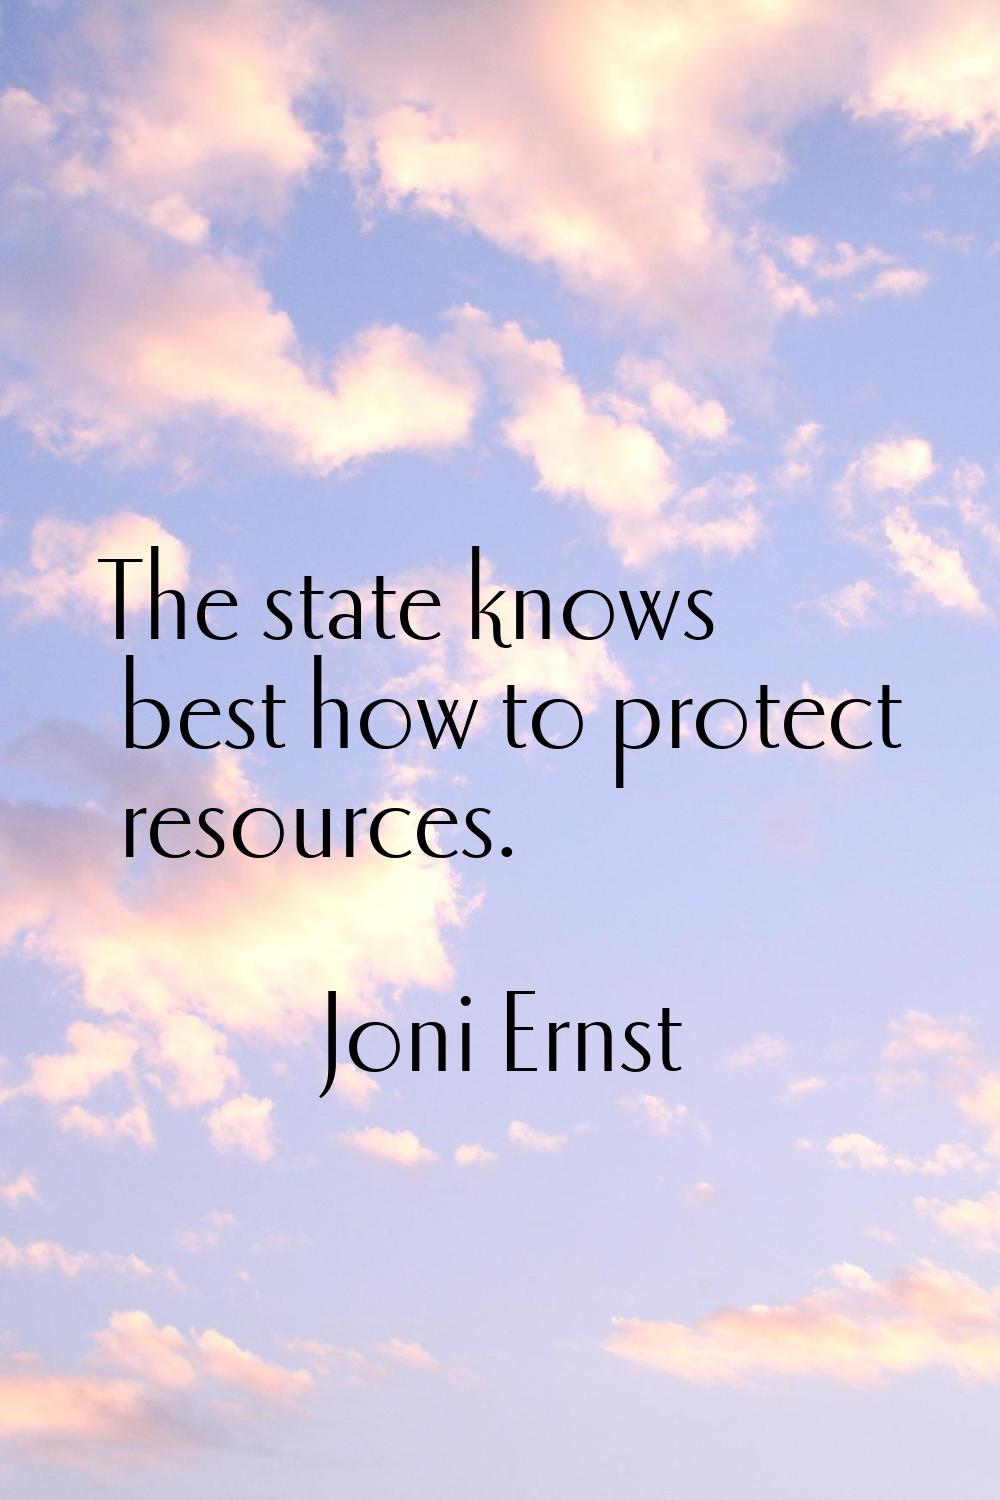 The state knows best how to protect resources.